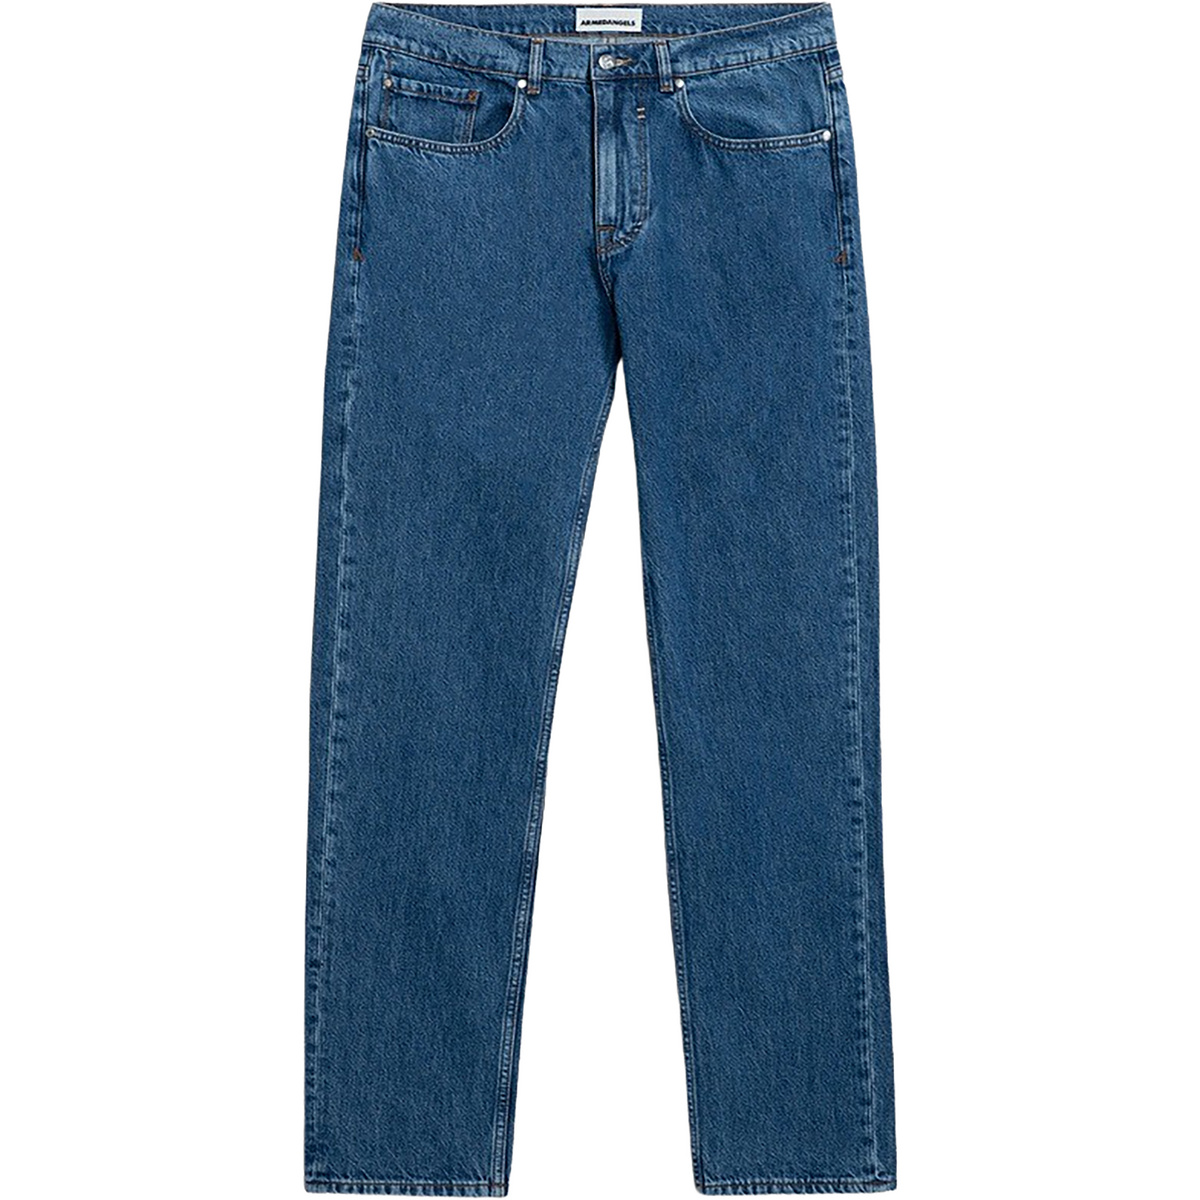 Image of Armedangels Uomo Jeans Dylaano Retro